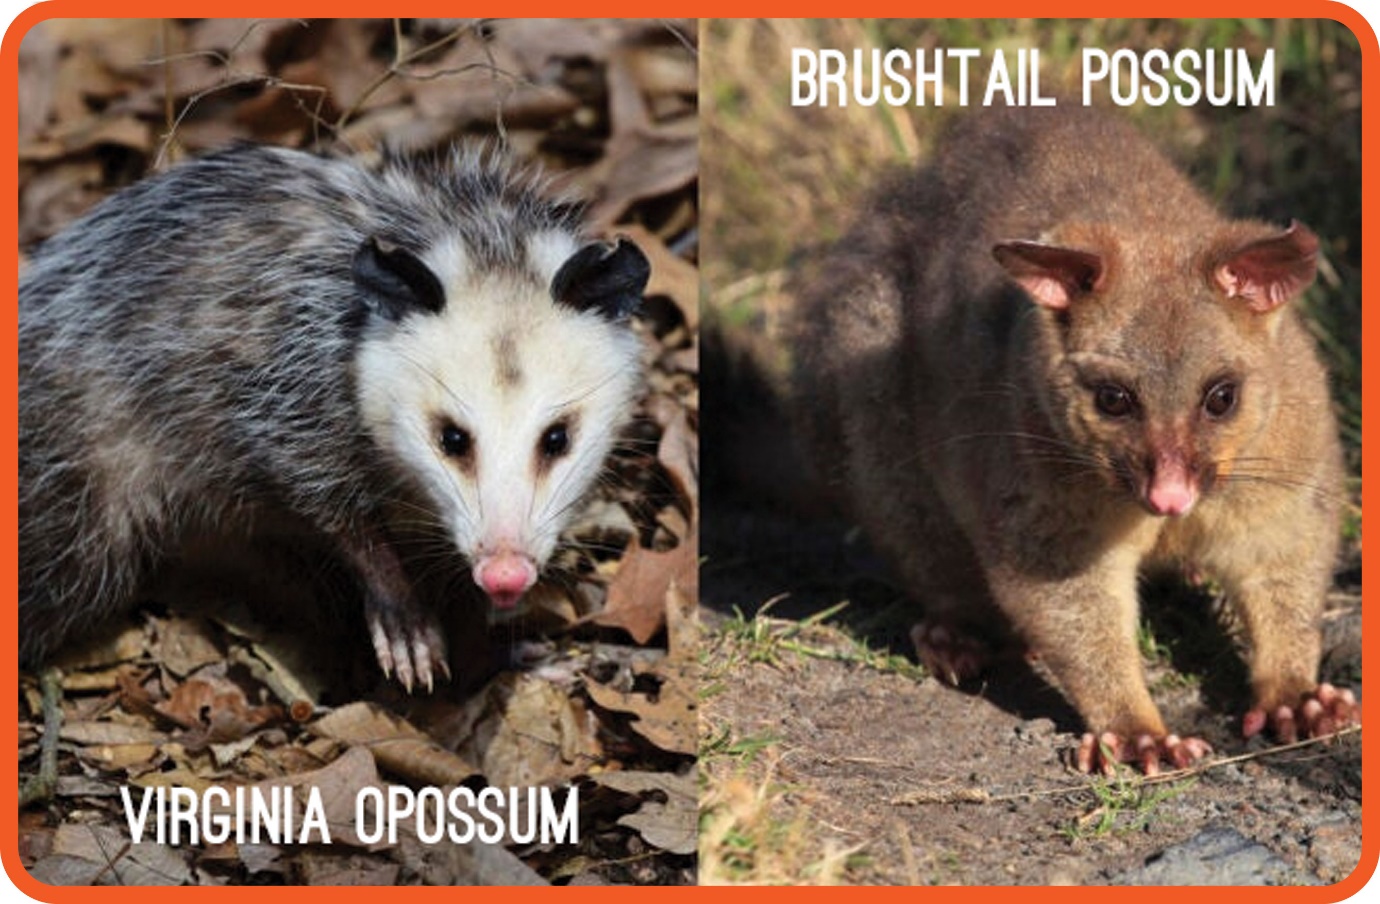 A collage of possum and possumDescription automatically generated